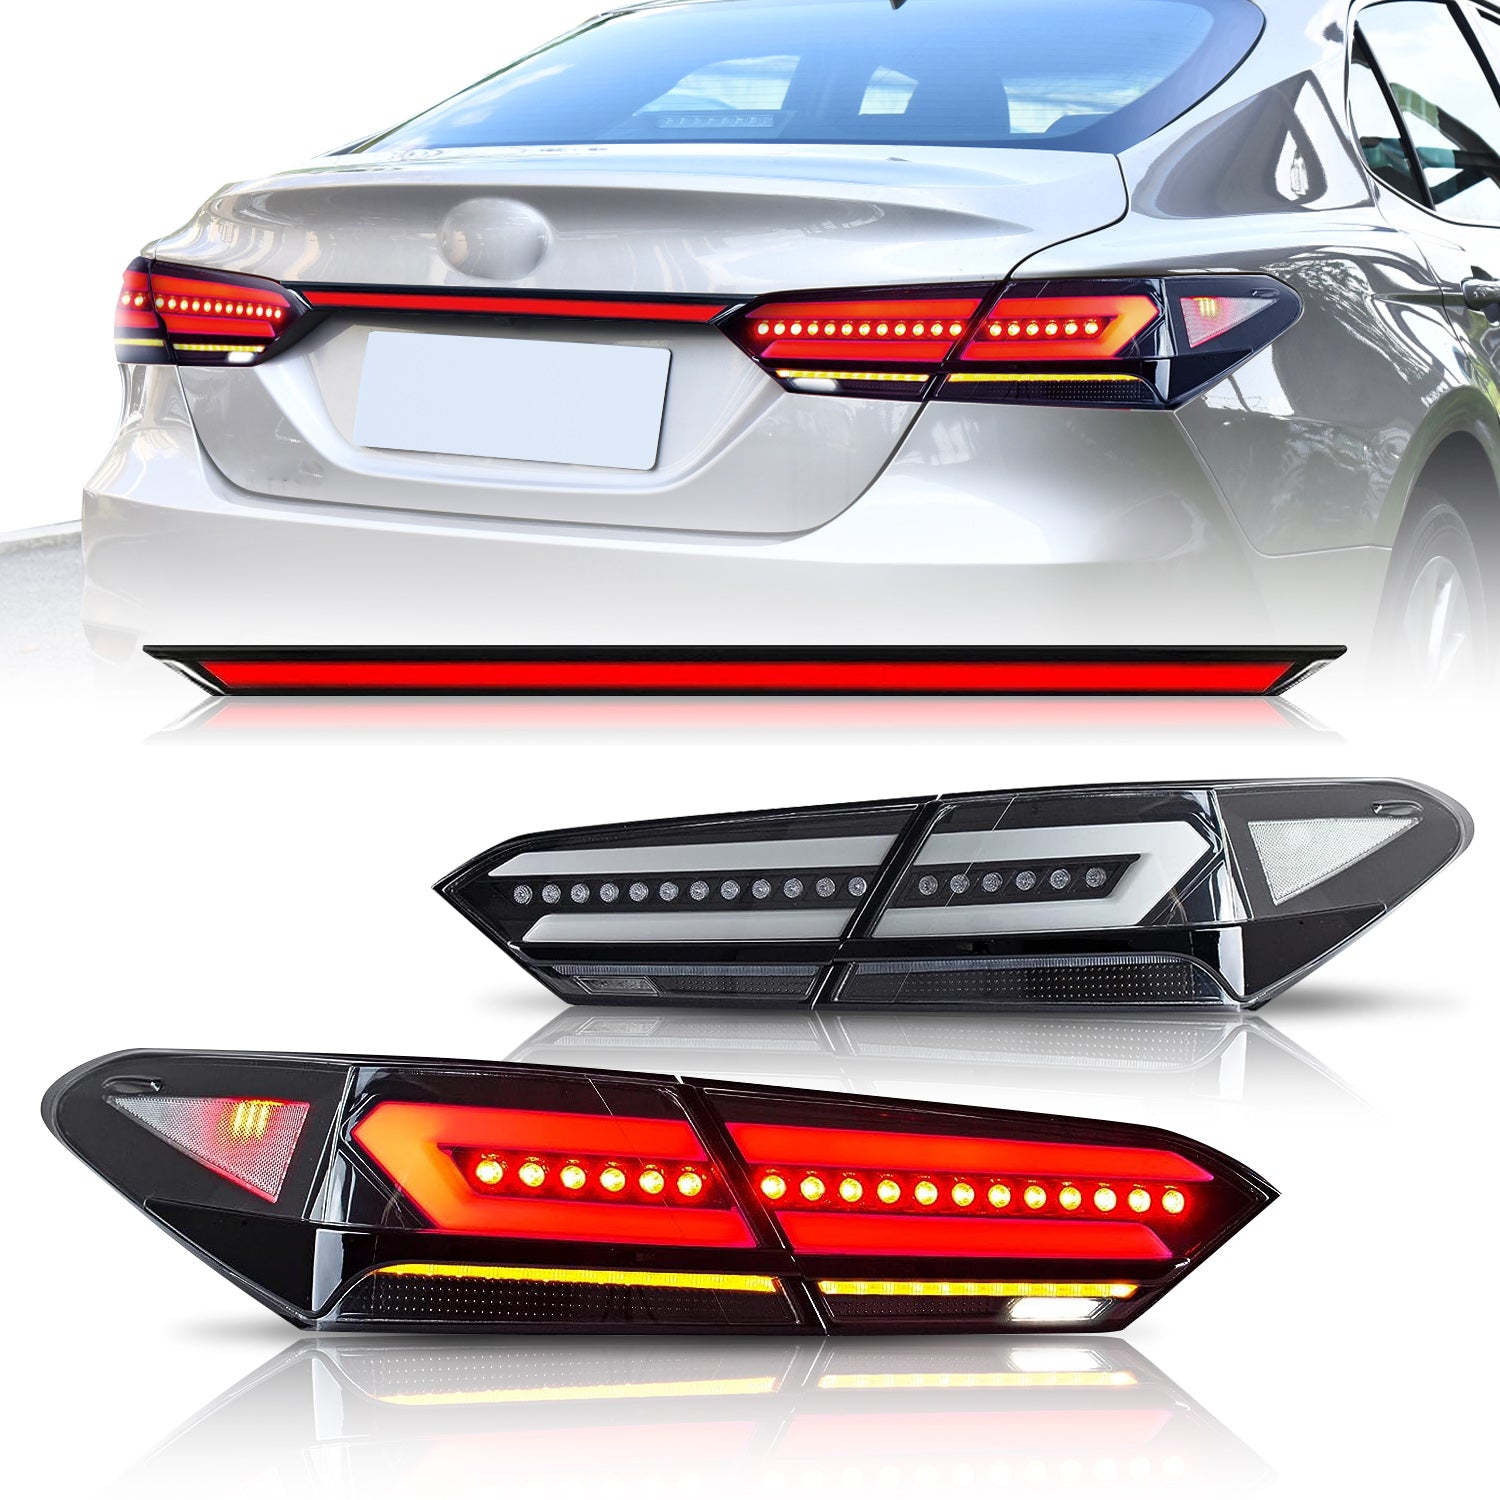 Archaic LED Car Lights | Tail Lights Assembly For 8th Gen Toyota Camry